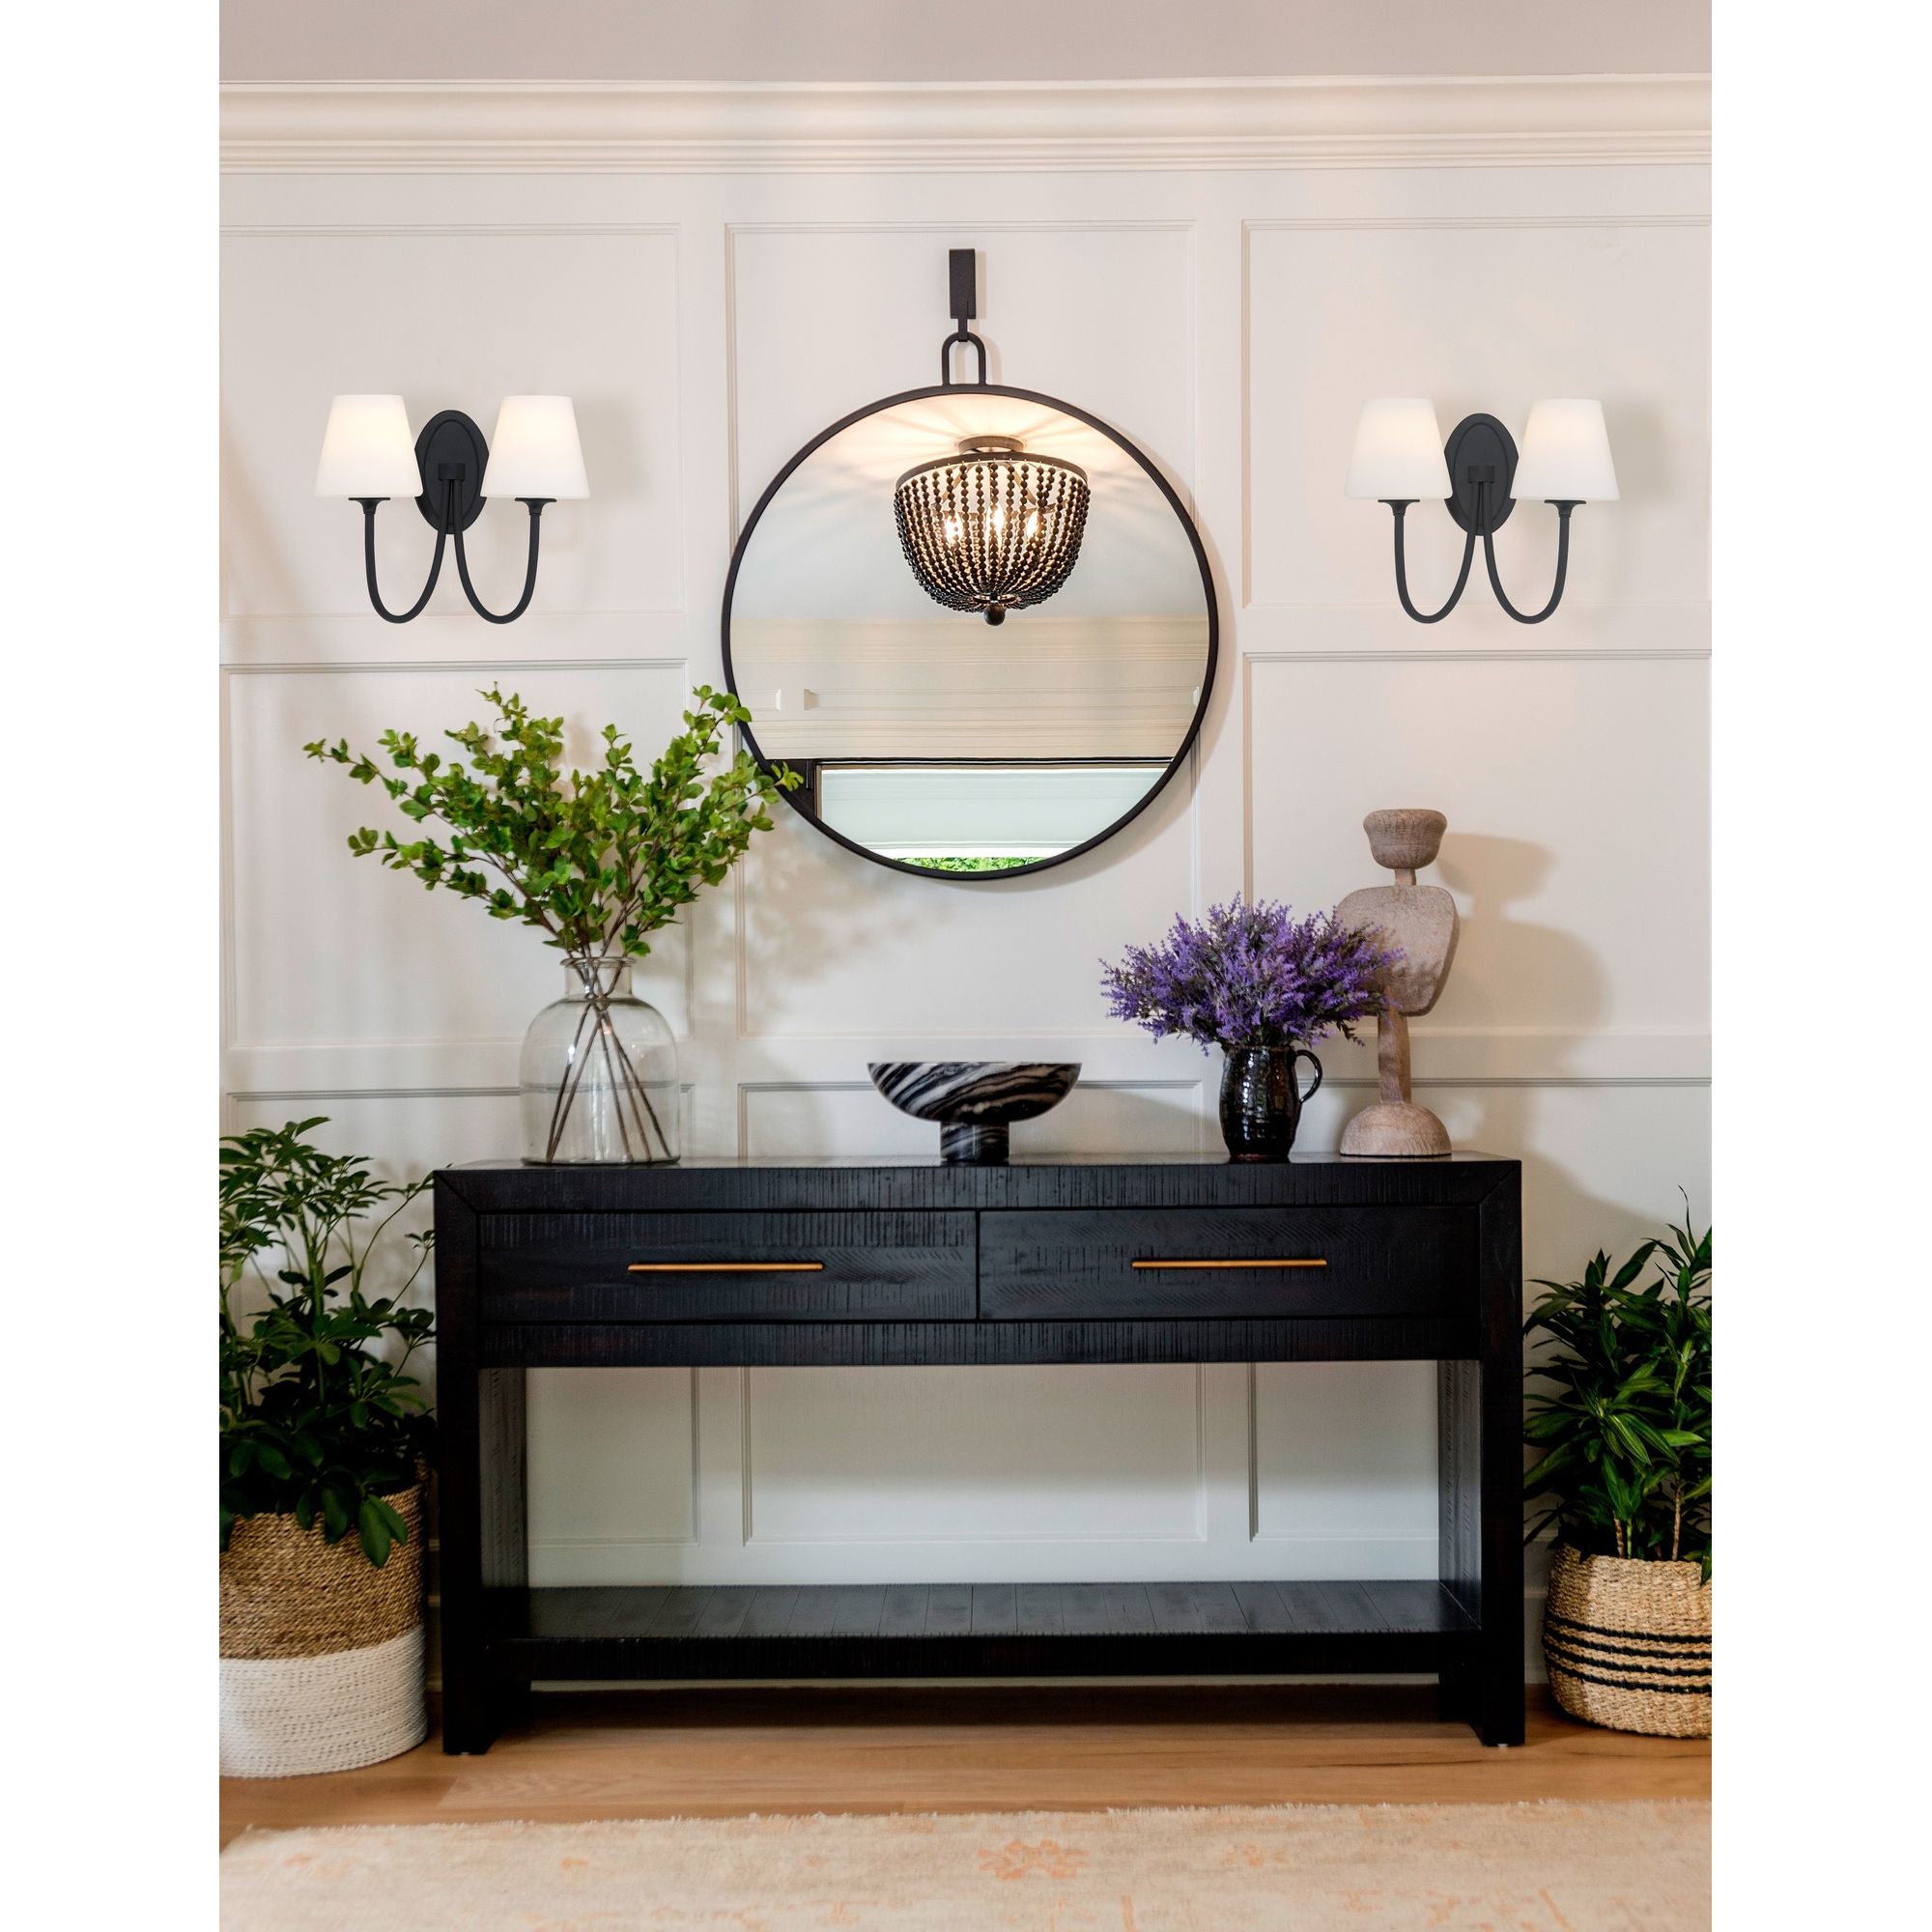 Juno 2 Light Black Forged Wall Mount